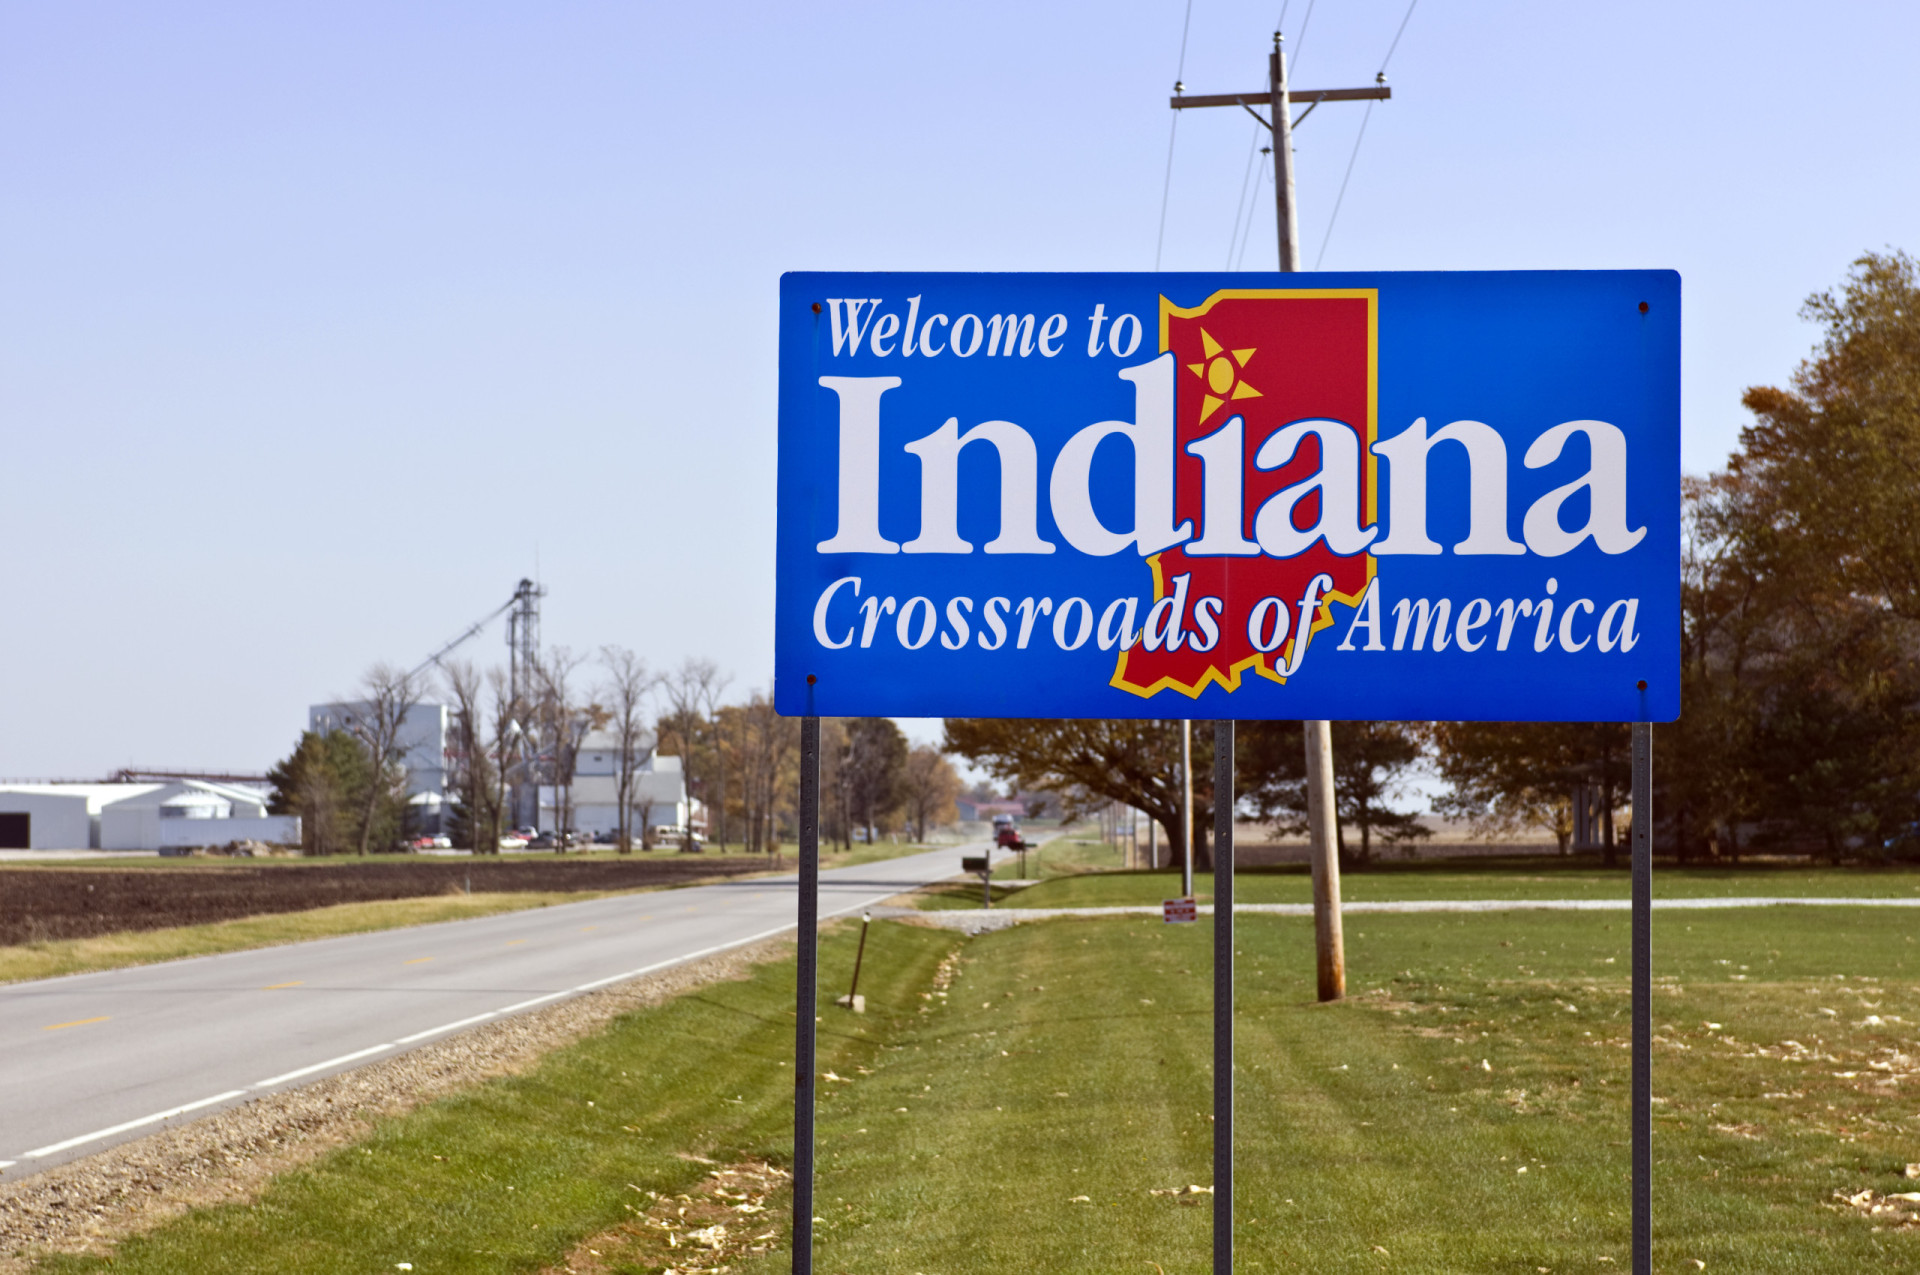 <p>Indiana's welcome sign makes reference to the state's location at the junction of four major Interstate Highways. </p><p>You may also like:<a href="https://www.starsinsider.com/n/295349?utm_source=msn.com&utm_medium=display&utm_campaign=referral_description&utm_content=572689en-en"> The most extravagant treasures ever found</a></p>